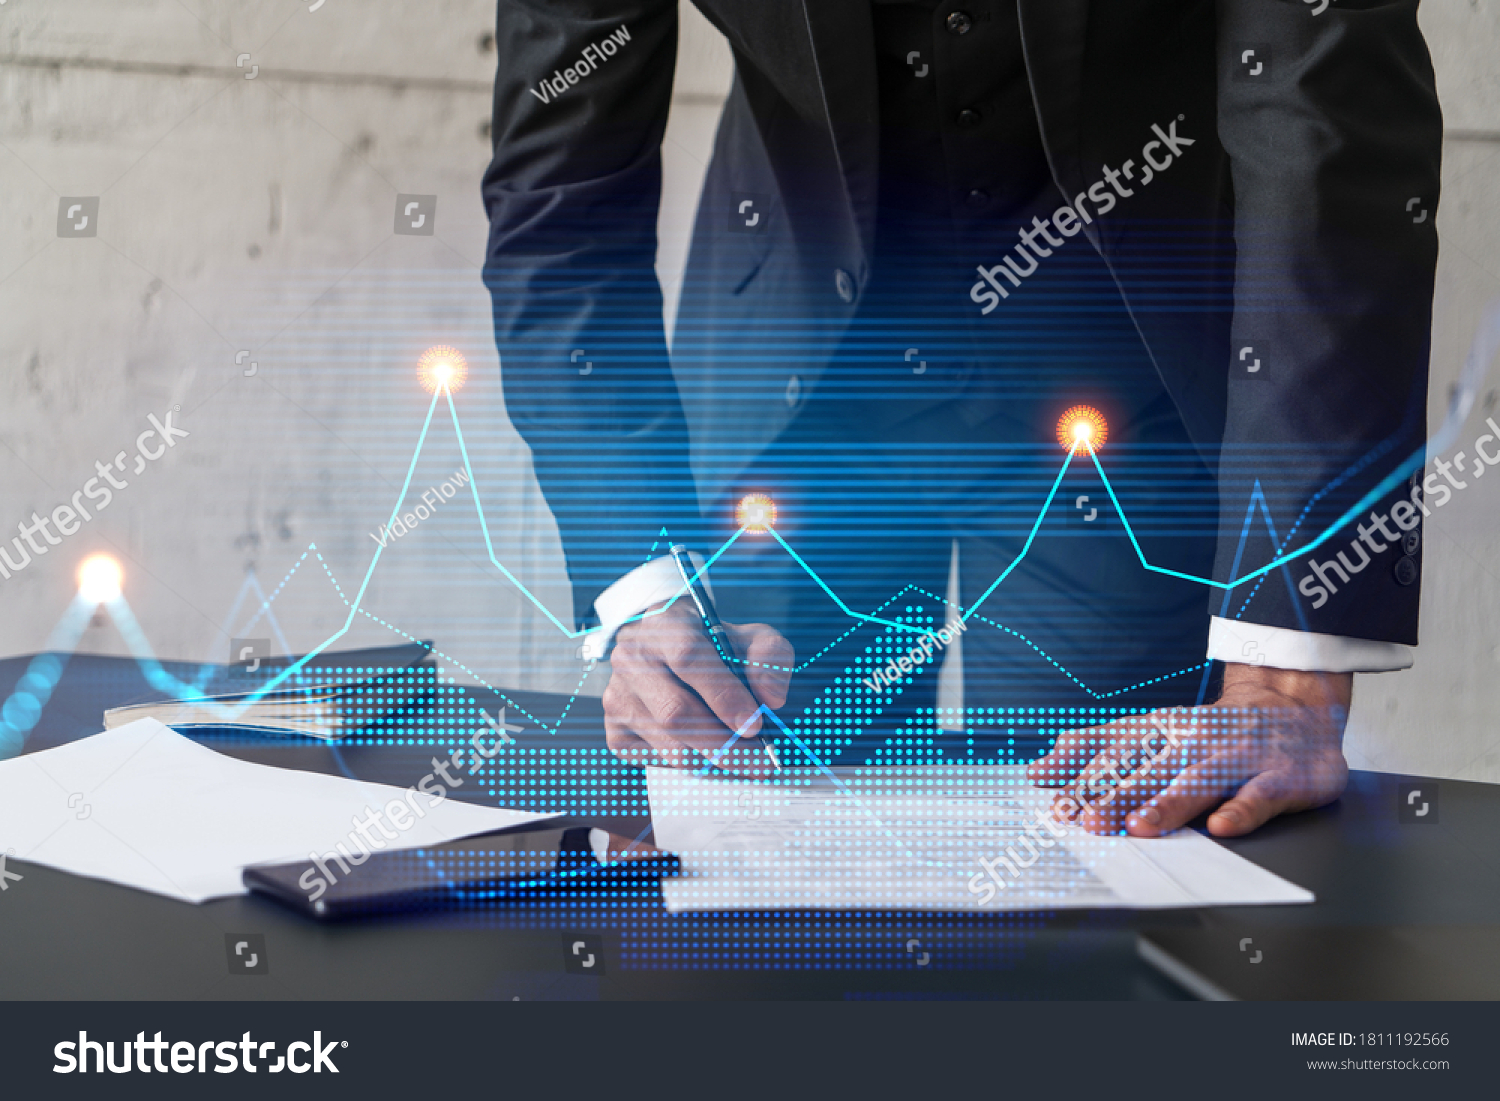 Businessman in suit signs contract. Double exposure with financial chart hologram. Man signing mortgage agreement. Real estate market analysis and investment concept. #1811192566